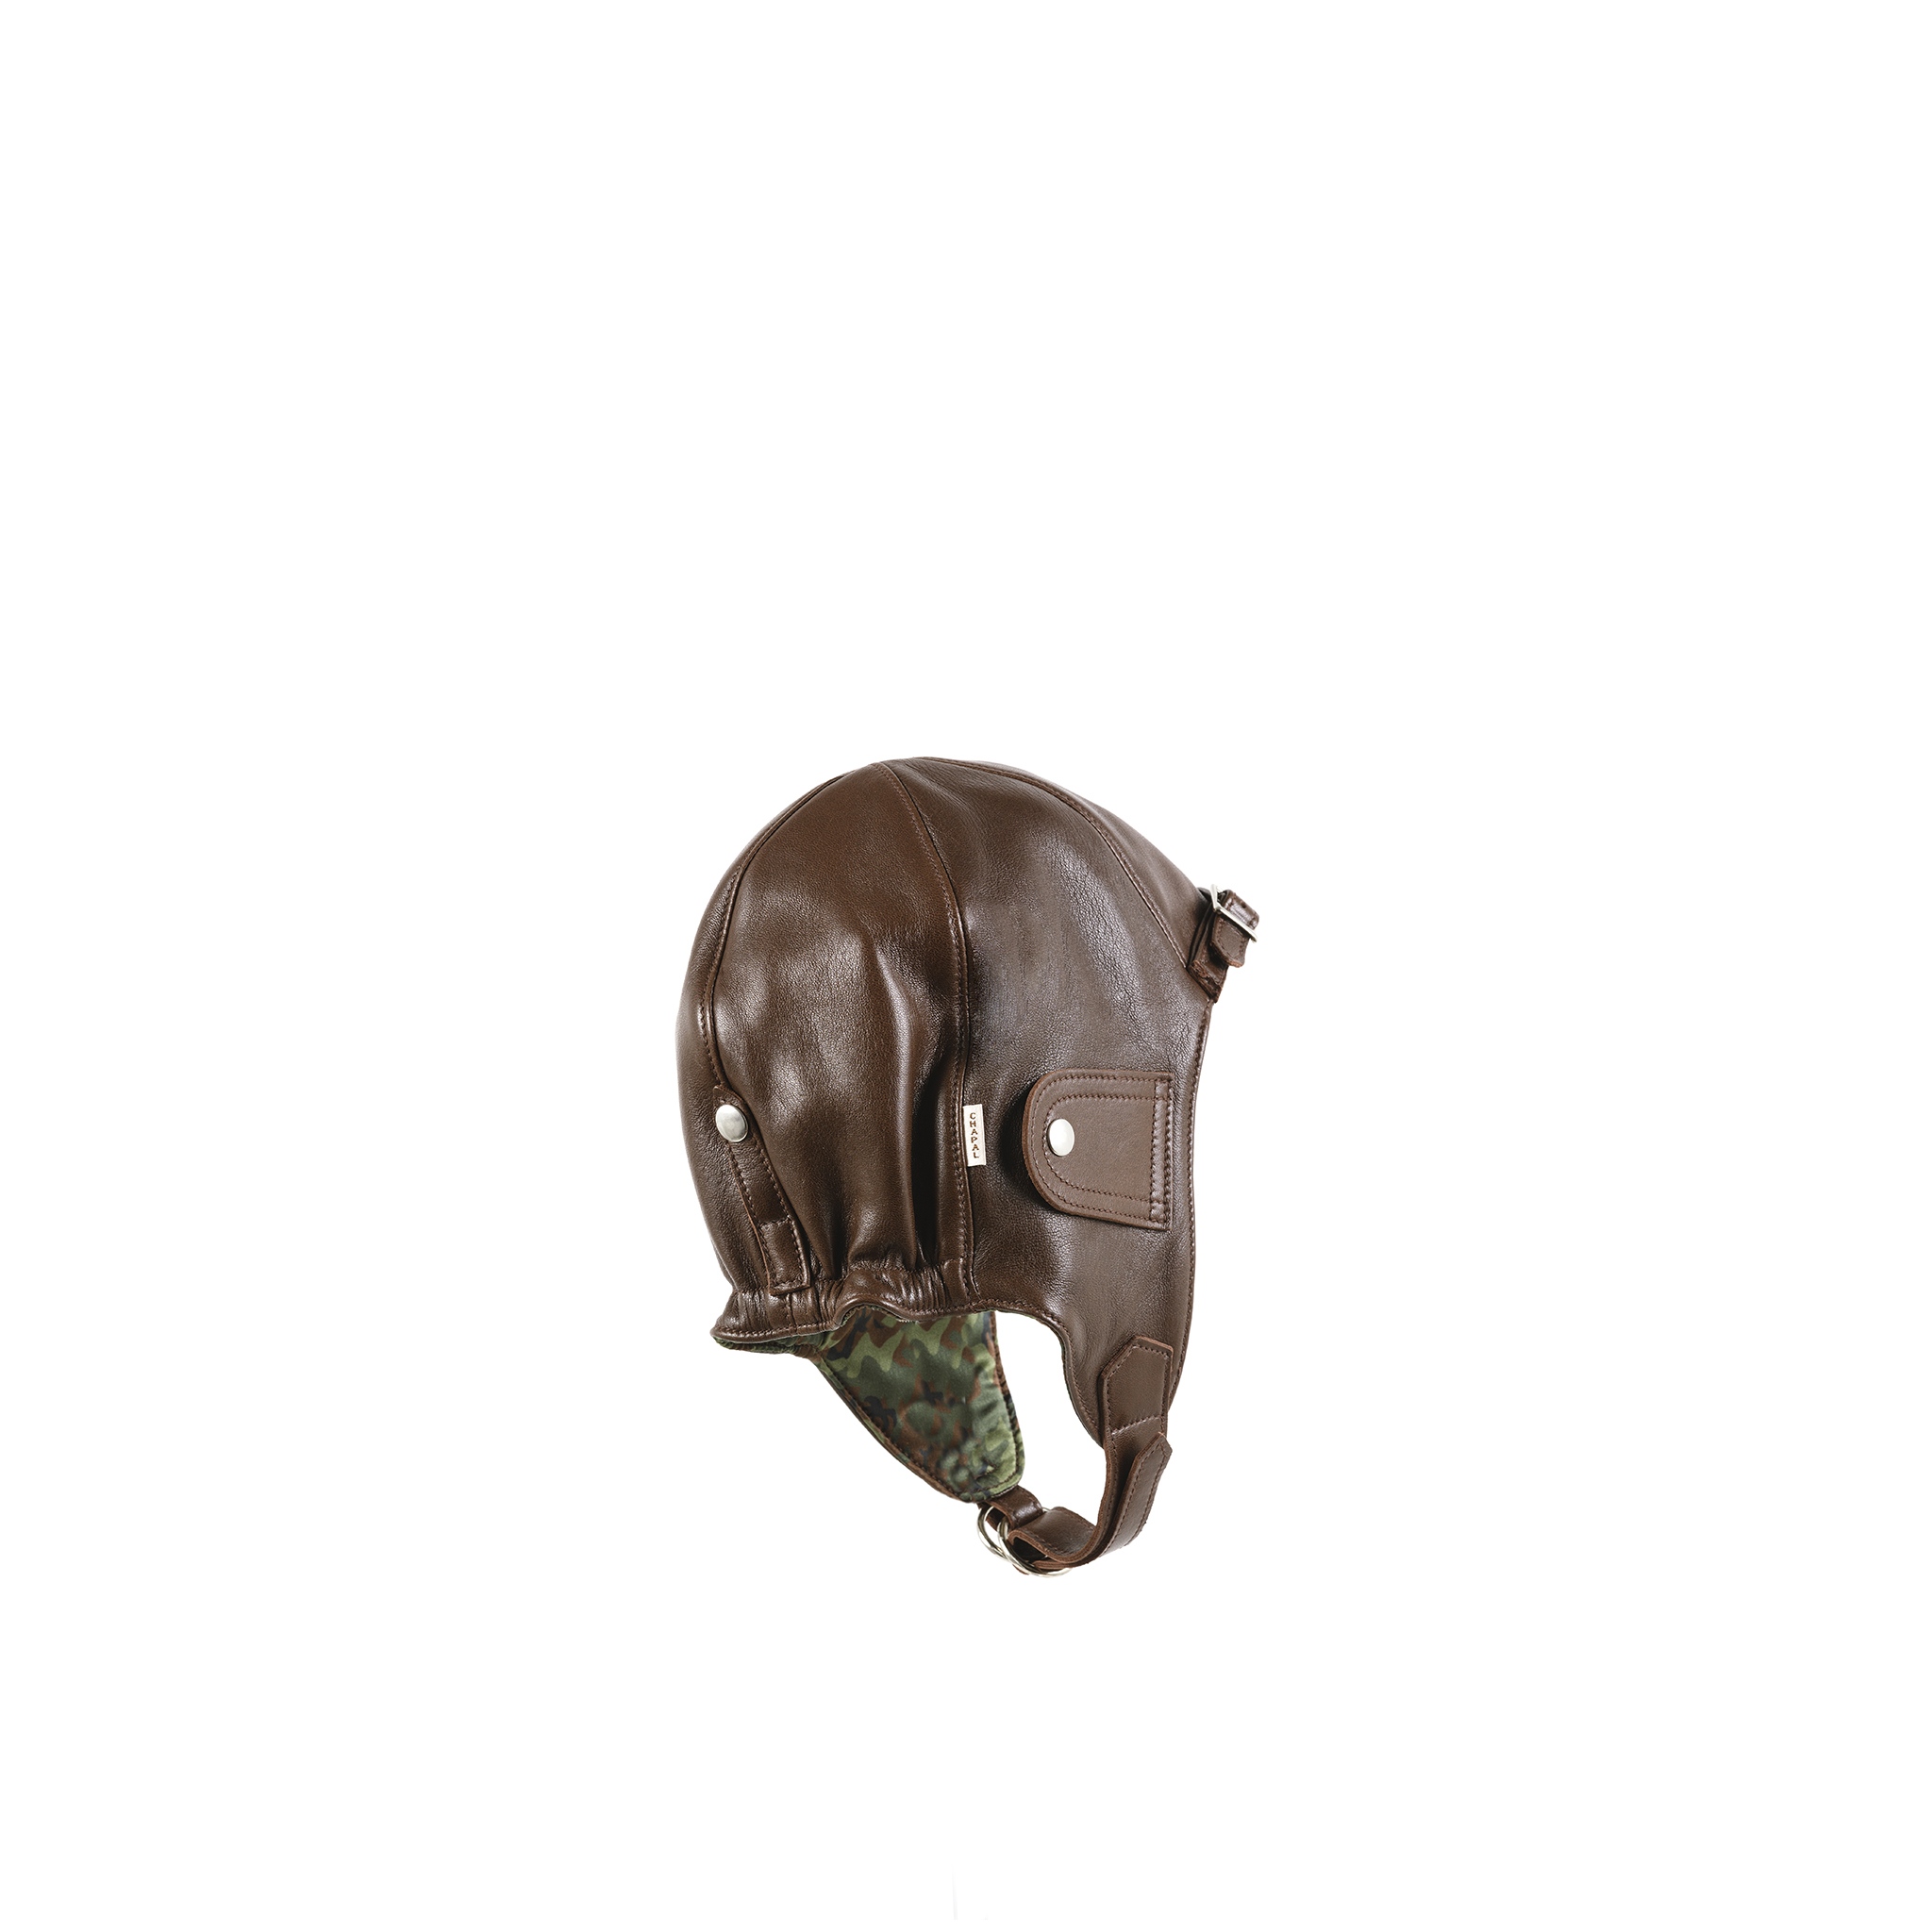 Driver Helmet - Camouflage lining - Glossy leather - Brown color